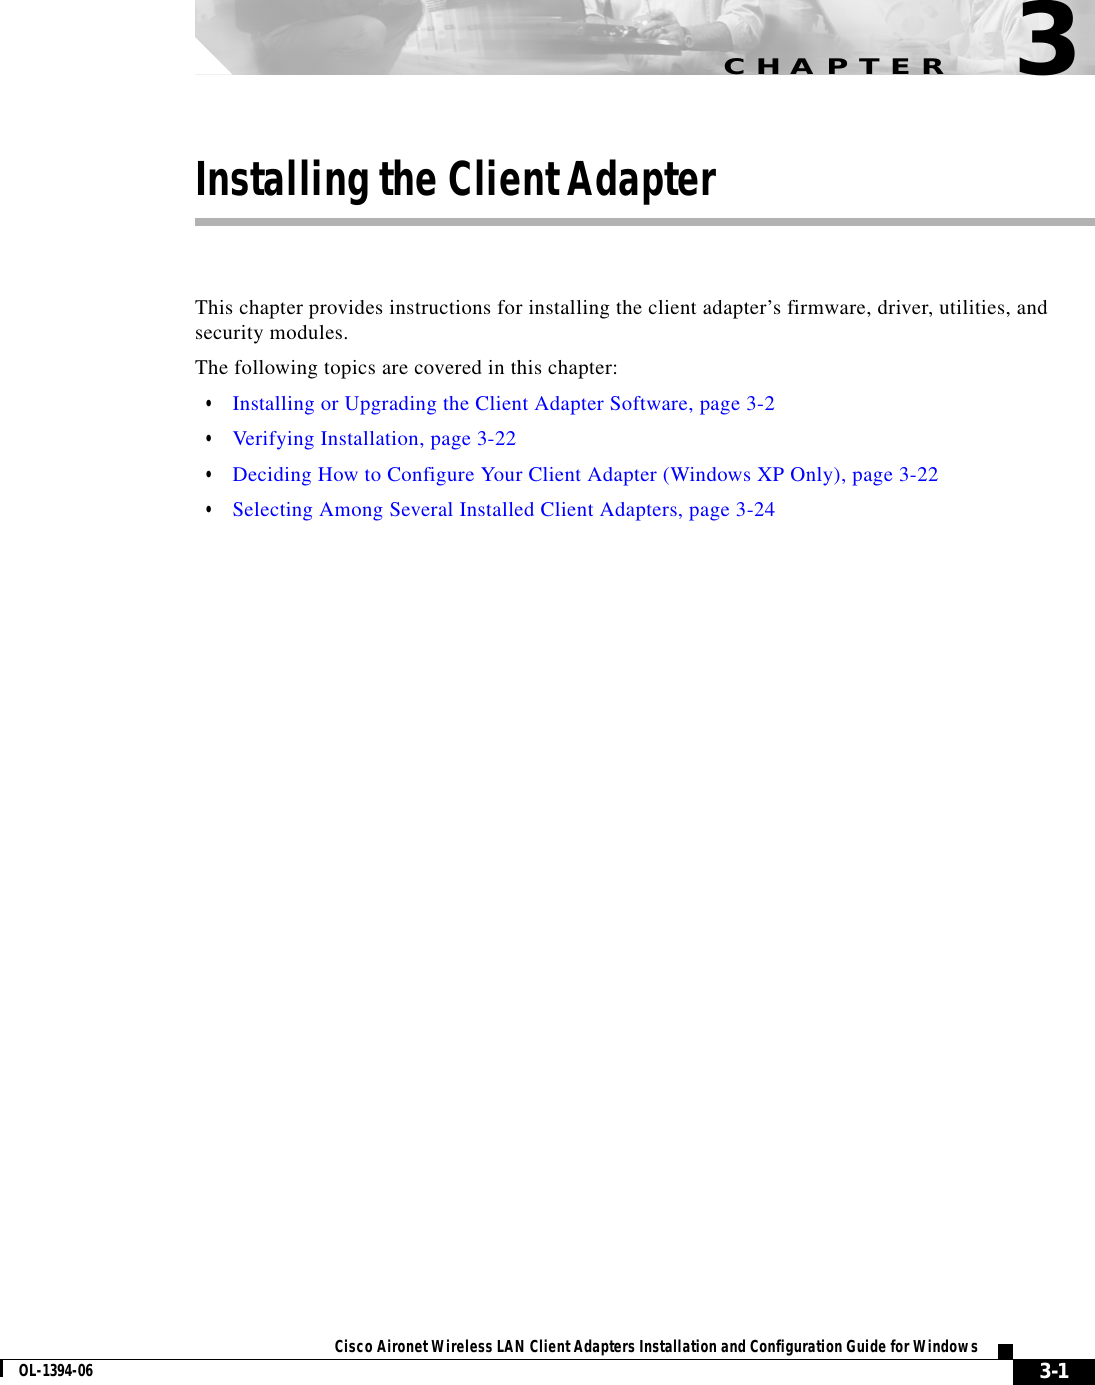 CHAPTER3-1Cisco Aironet Wireless LAN Client Adapters Installation and Configuration Guide for WindowsOL-1394-063Installing the Client AdapterThis chapter provides instructions for installing the client adapter’s firmware, driver, utilities, and security modules.The following topics are covered in this chapter:•Installing or Upgrading the Client Adapter Software, page 3-2•Verifying Installation, page 3-22•Deciding How to Configure Your Client Adapter (Windows XP Only), page 3-22•Selecting Among Several Installed Client Adapters, page 3-24